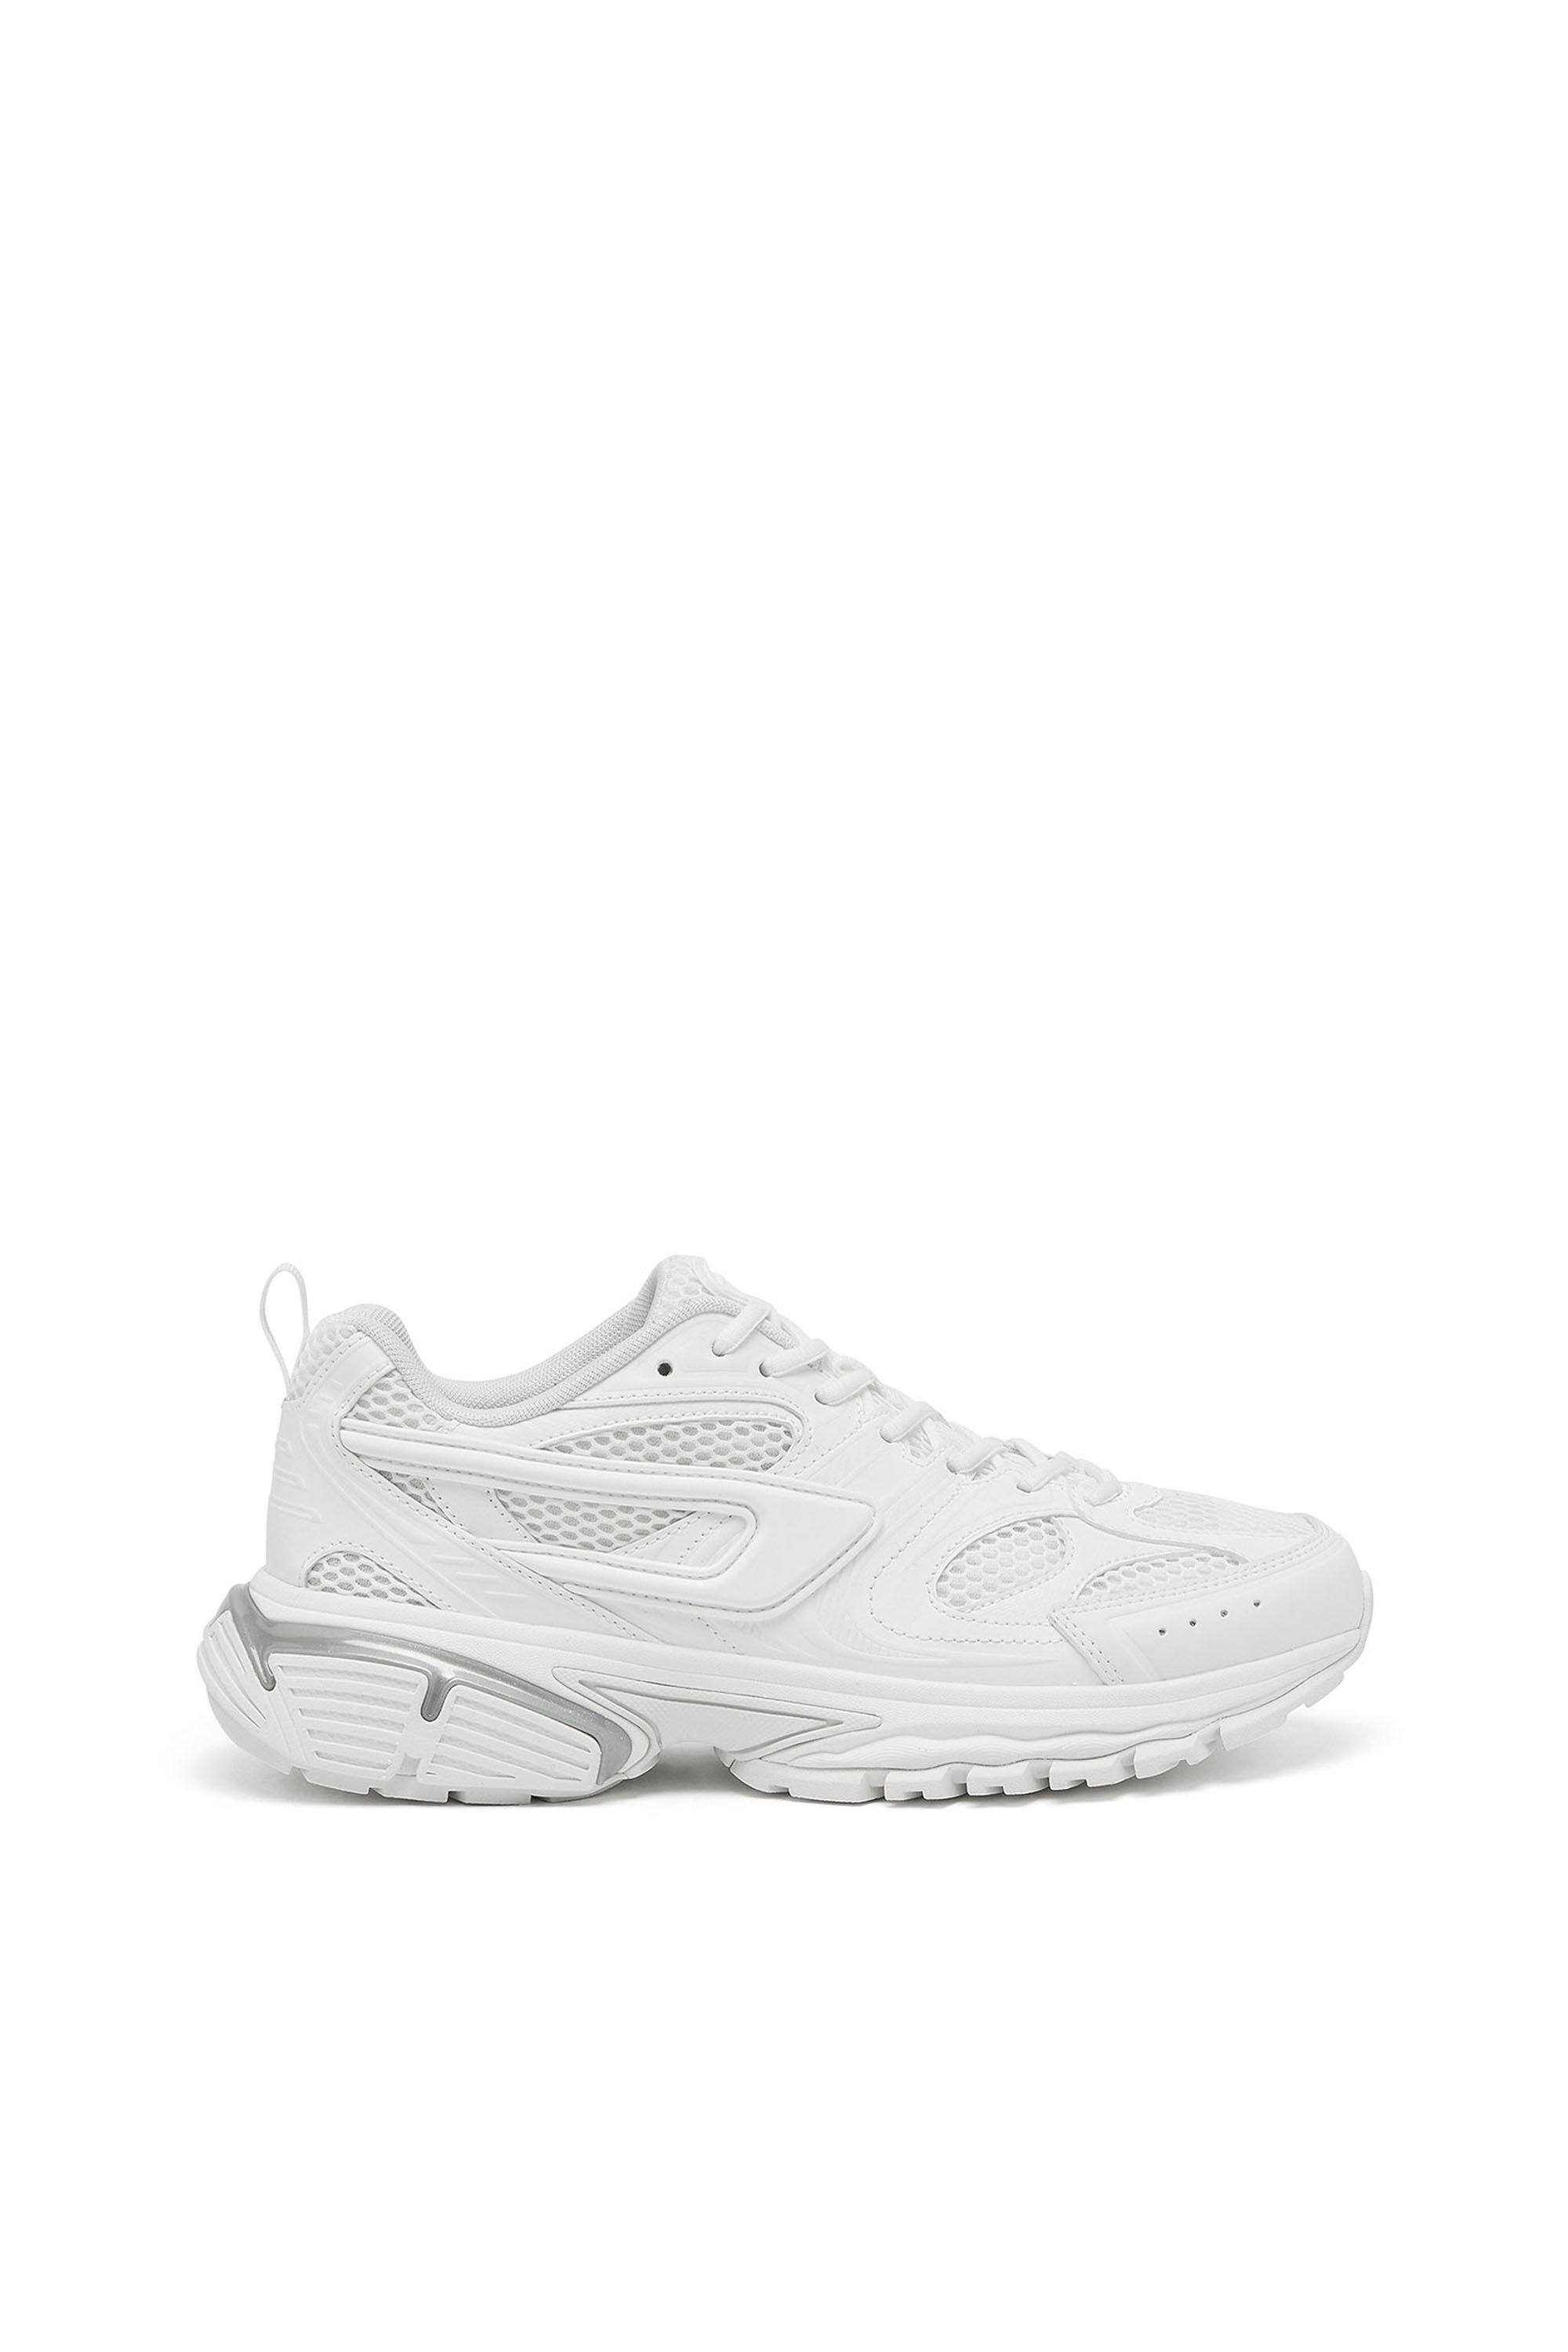 Diesel - S-SERENDIPITY PRO-X1, Man S-Serendipity-Monochrome sneakers in mesh and PU in White - Image 1